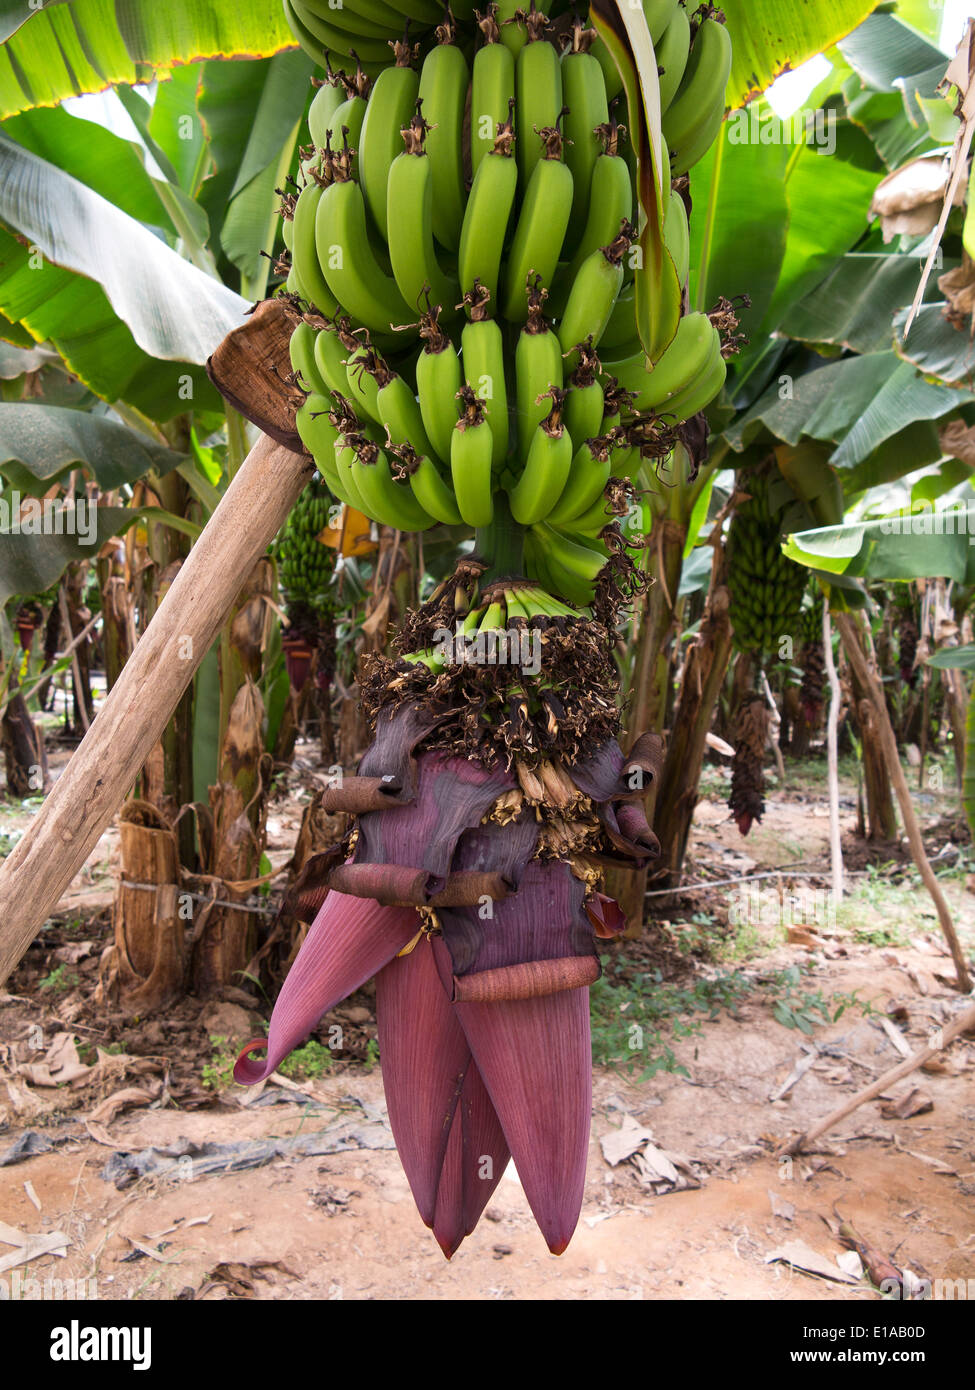 Details of banana trees showing unripe green fruit and inflorescence, growing inside very large polytunnels Stock Photo